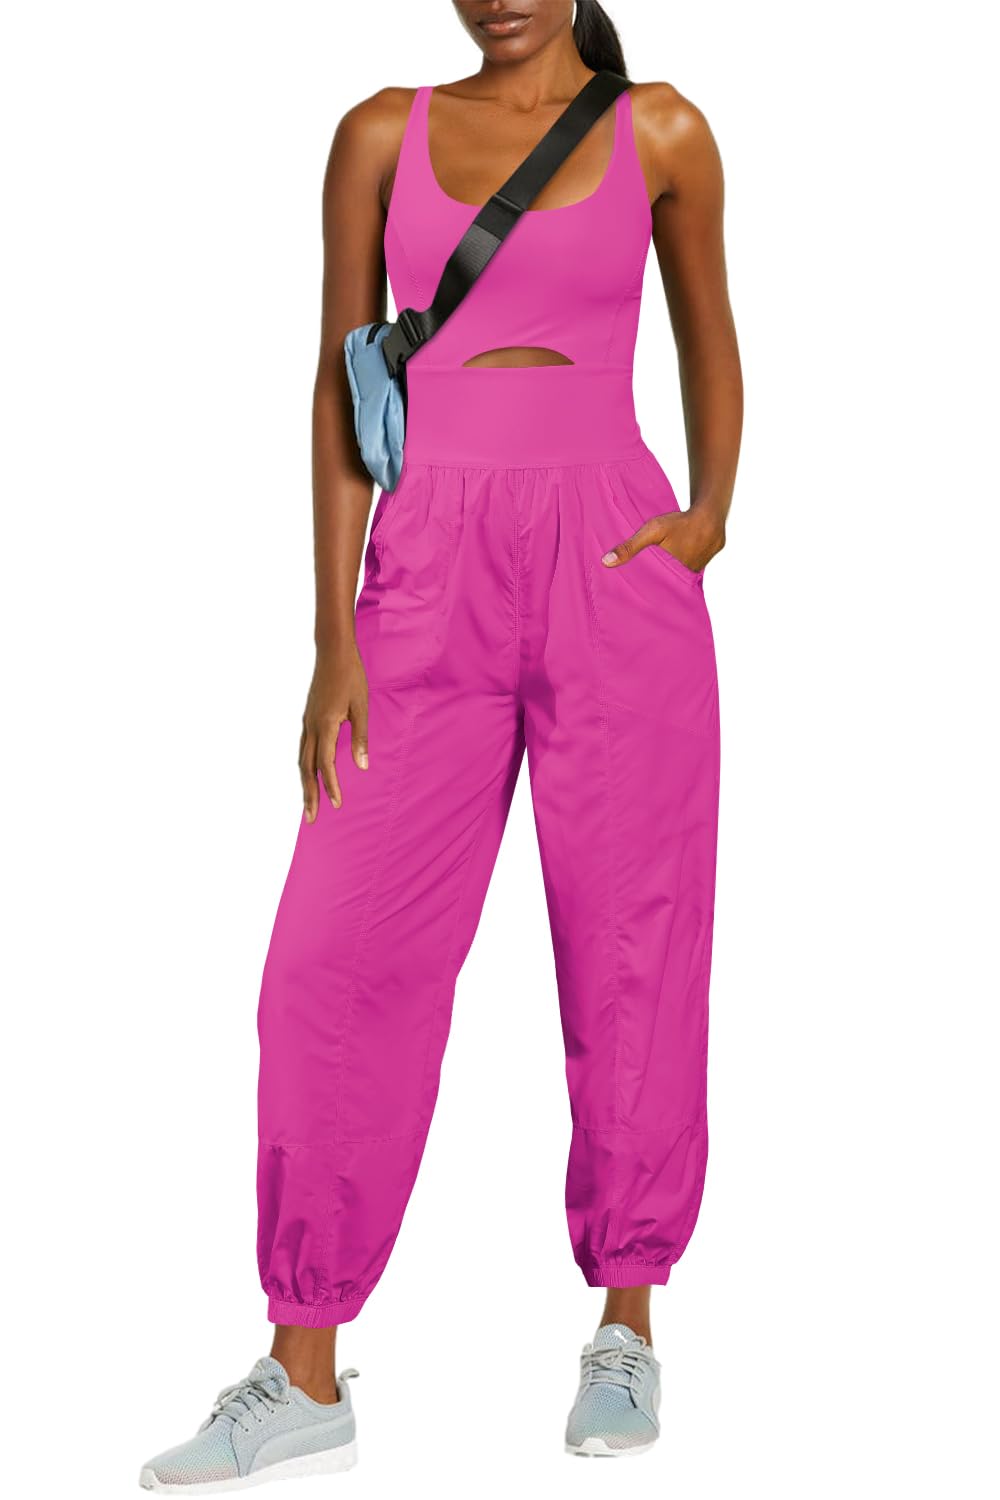 🔥Womens Camisole Tracksuits Romper with Pockets (Buy 2 Free Shipping)